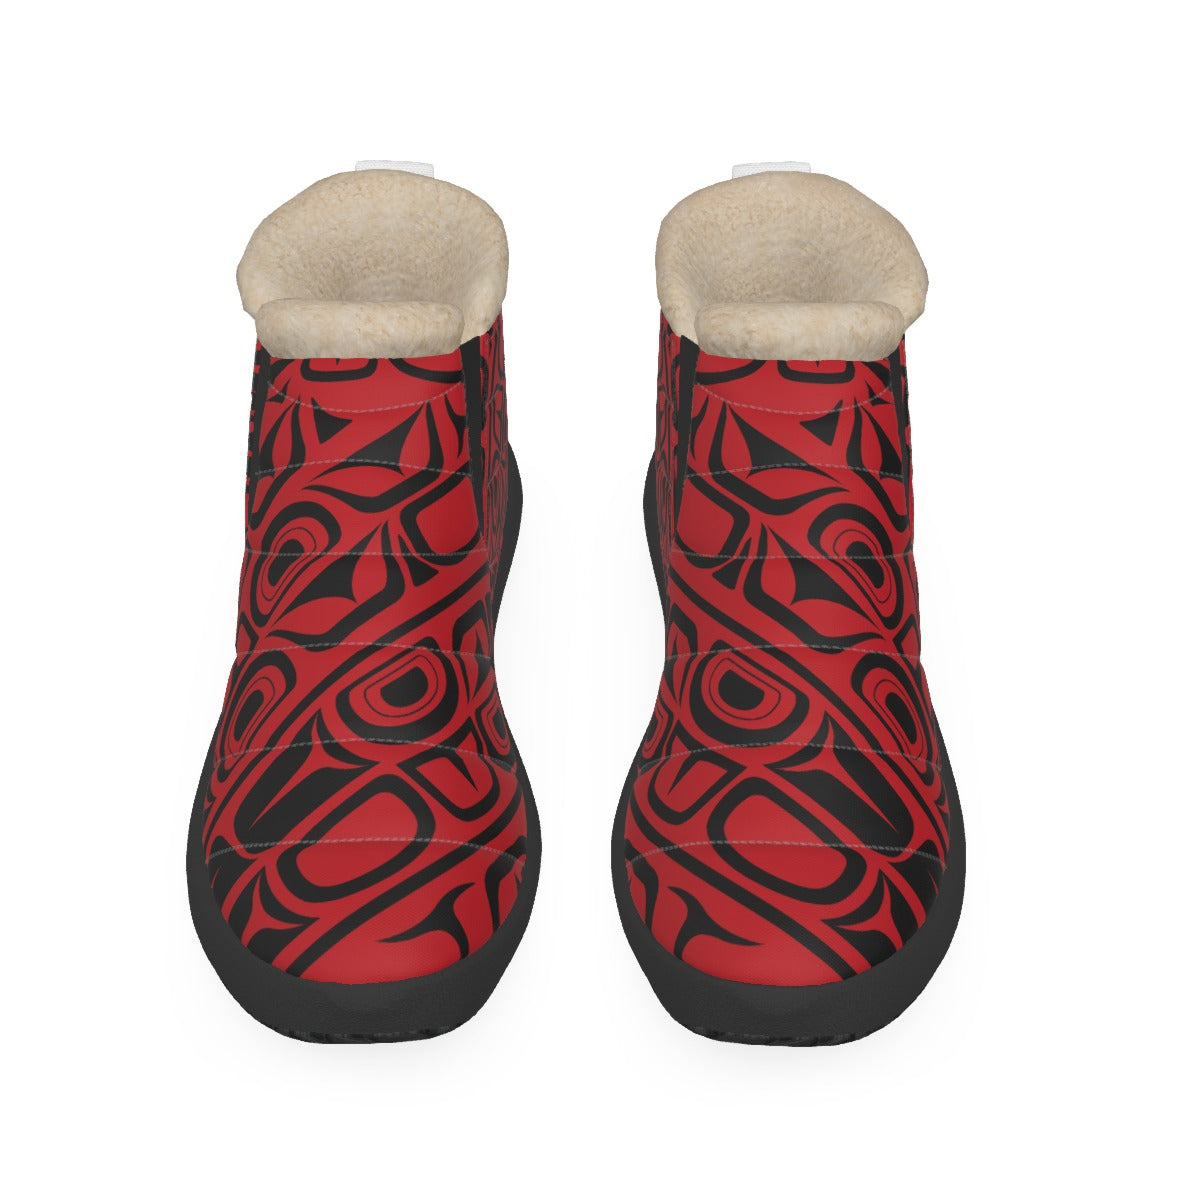 Form Black on Red Women's Plush Boots